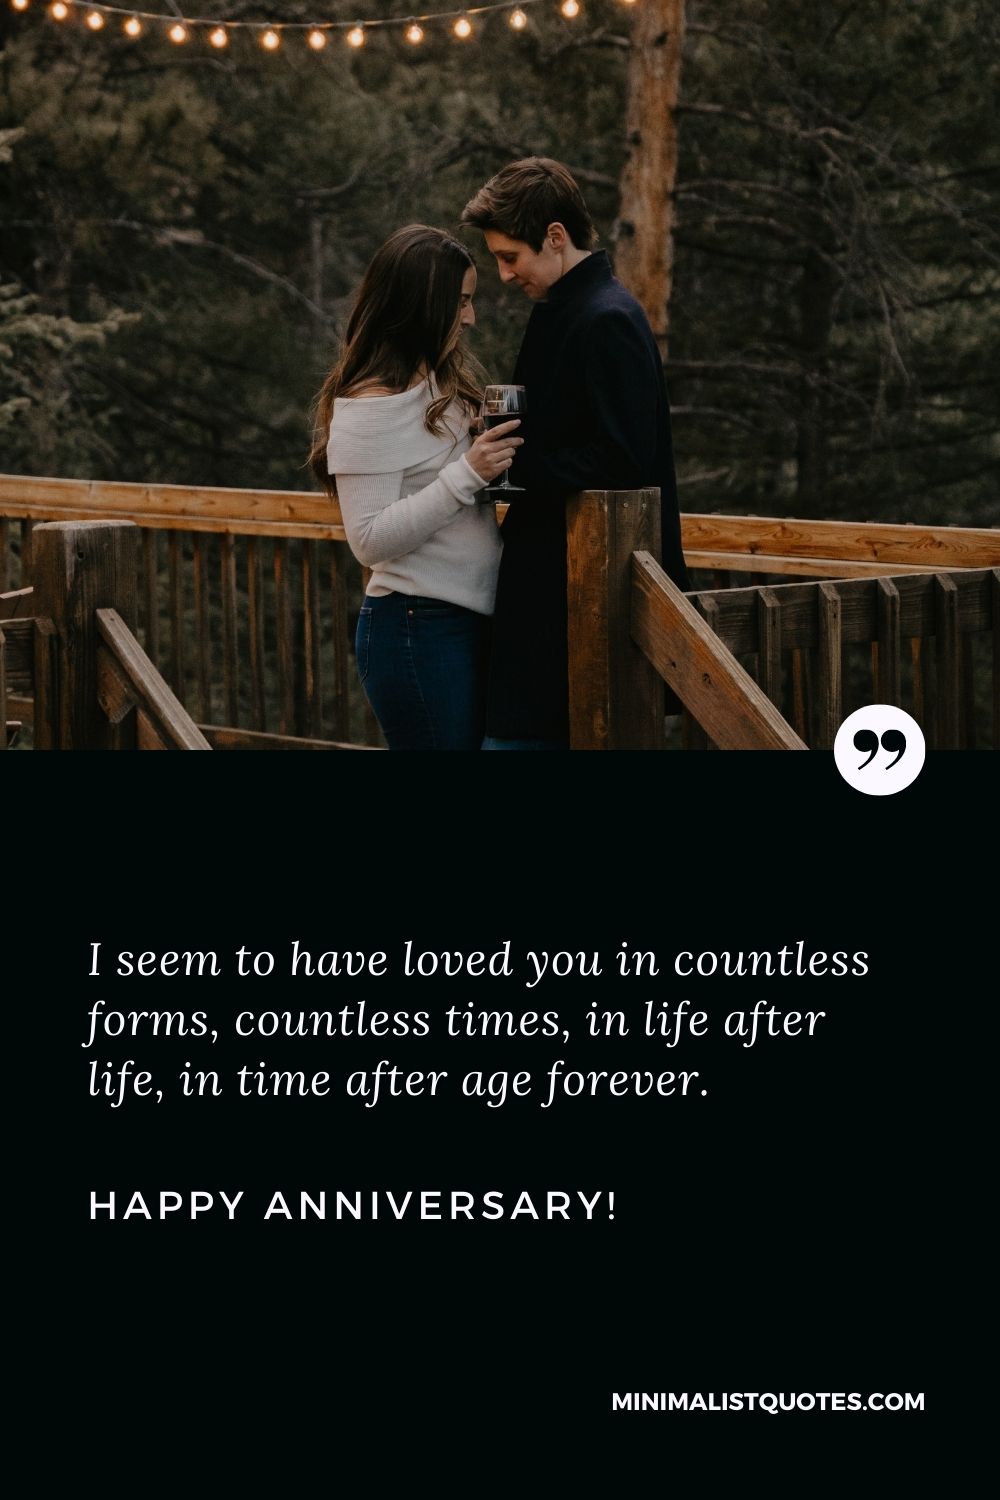 Anniversary message for boyfriend: I seem to have loved you in countless forms, countless times, in life after life, in time after age forever. Happy Anniversary!